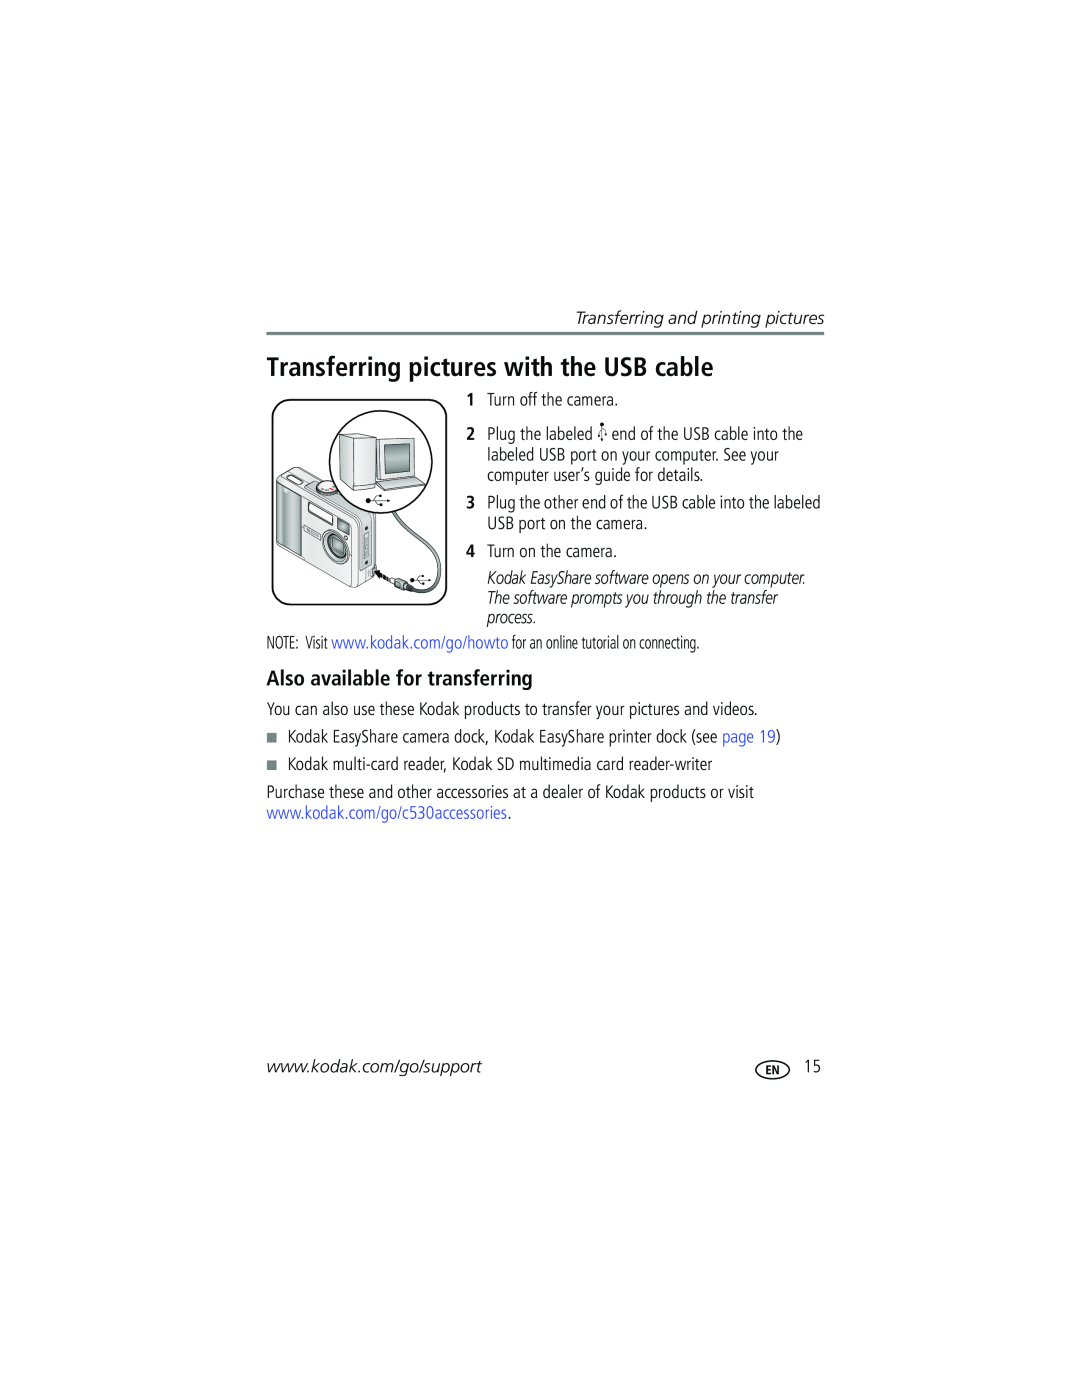 Kodak CD50, C315, C530 manual Transferring pictures with the USB cable, Also available for transferring 